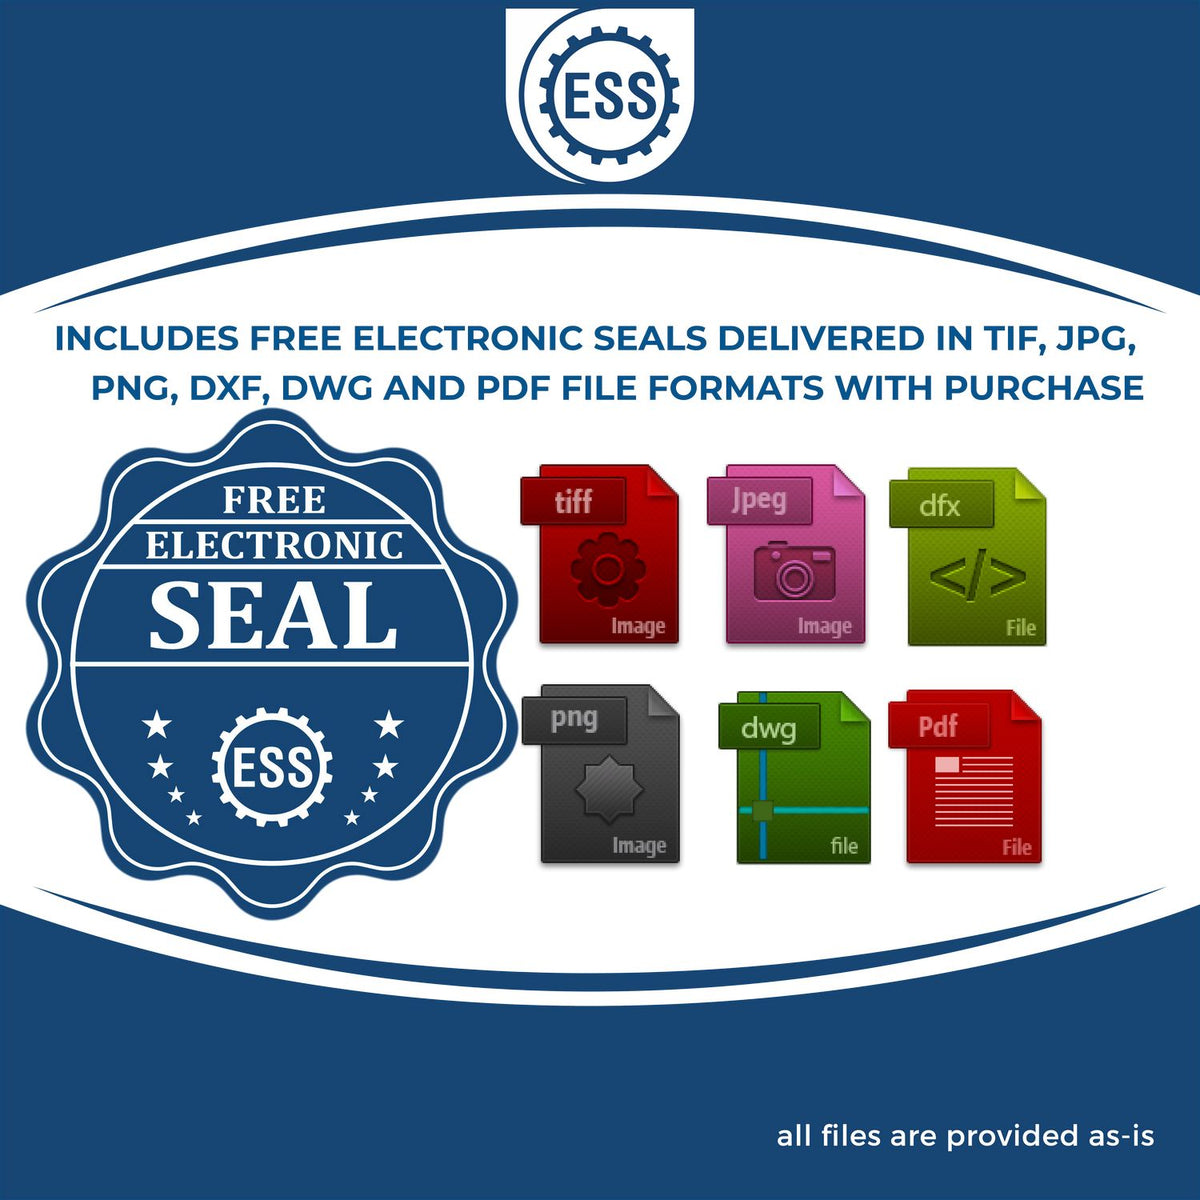 An infographic for the free electronic seal for the Hybrid Nebraska Geologist Seal illustrating the different file type icons such as DXF, DWG, TIF, JPG and PNG.